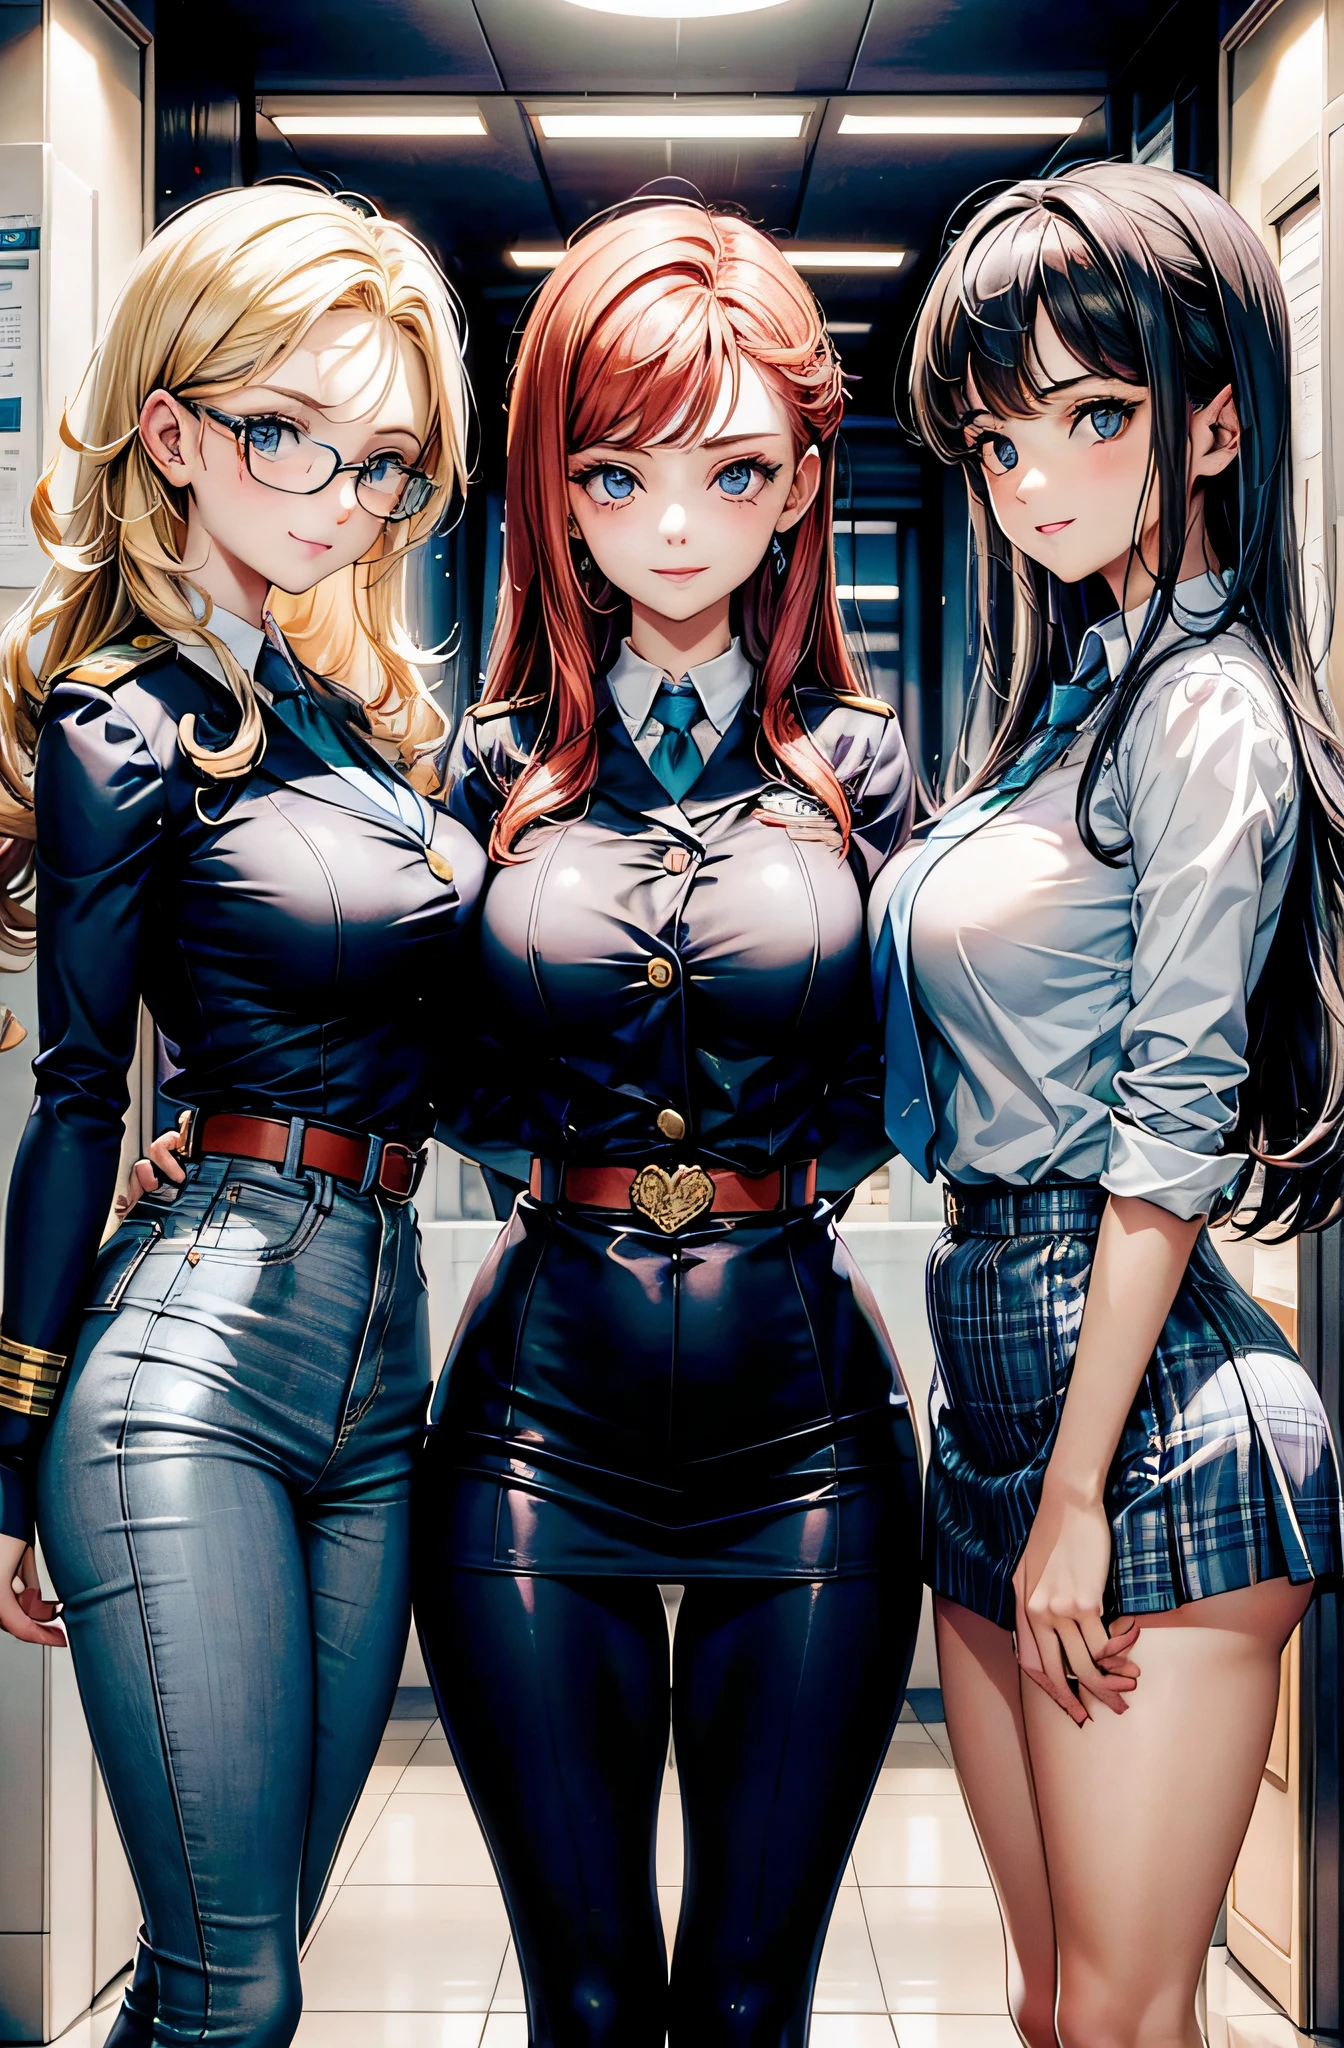 draw three different girls, the first is brunette with curls and blue eyes, the one in the middle is a beautiful blonde with wide eyes and the third from the right is a redhead with fair skin and blue eyes., the three are wearing student uniforms and looking at the viewer with a mischievous look, com mais uniforme estudantil, full of details and all three wearing glasses, sorrir maliciosamente para o telespectador, Ultra resolution, sobrancelhas franzidas e sorrir malicioso, Franzir as duas sobrancelhas, Franzir as duas sobrancelhas,Franzir as duas sobrancelhas, sorrir